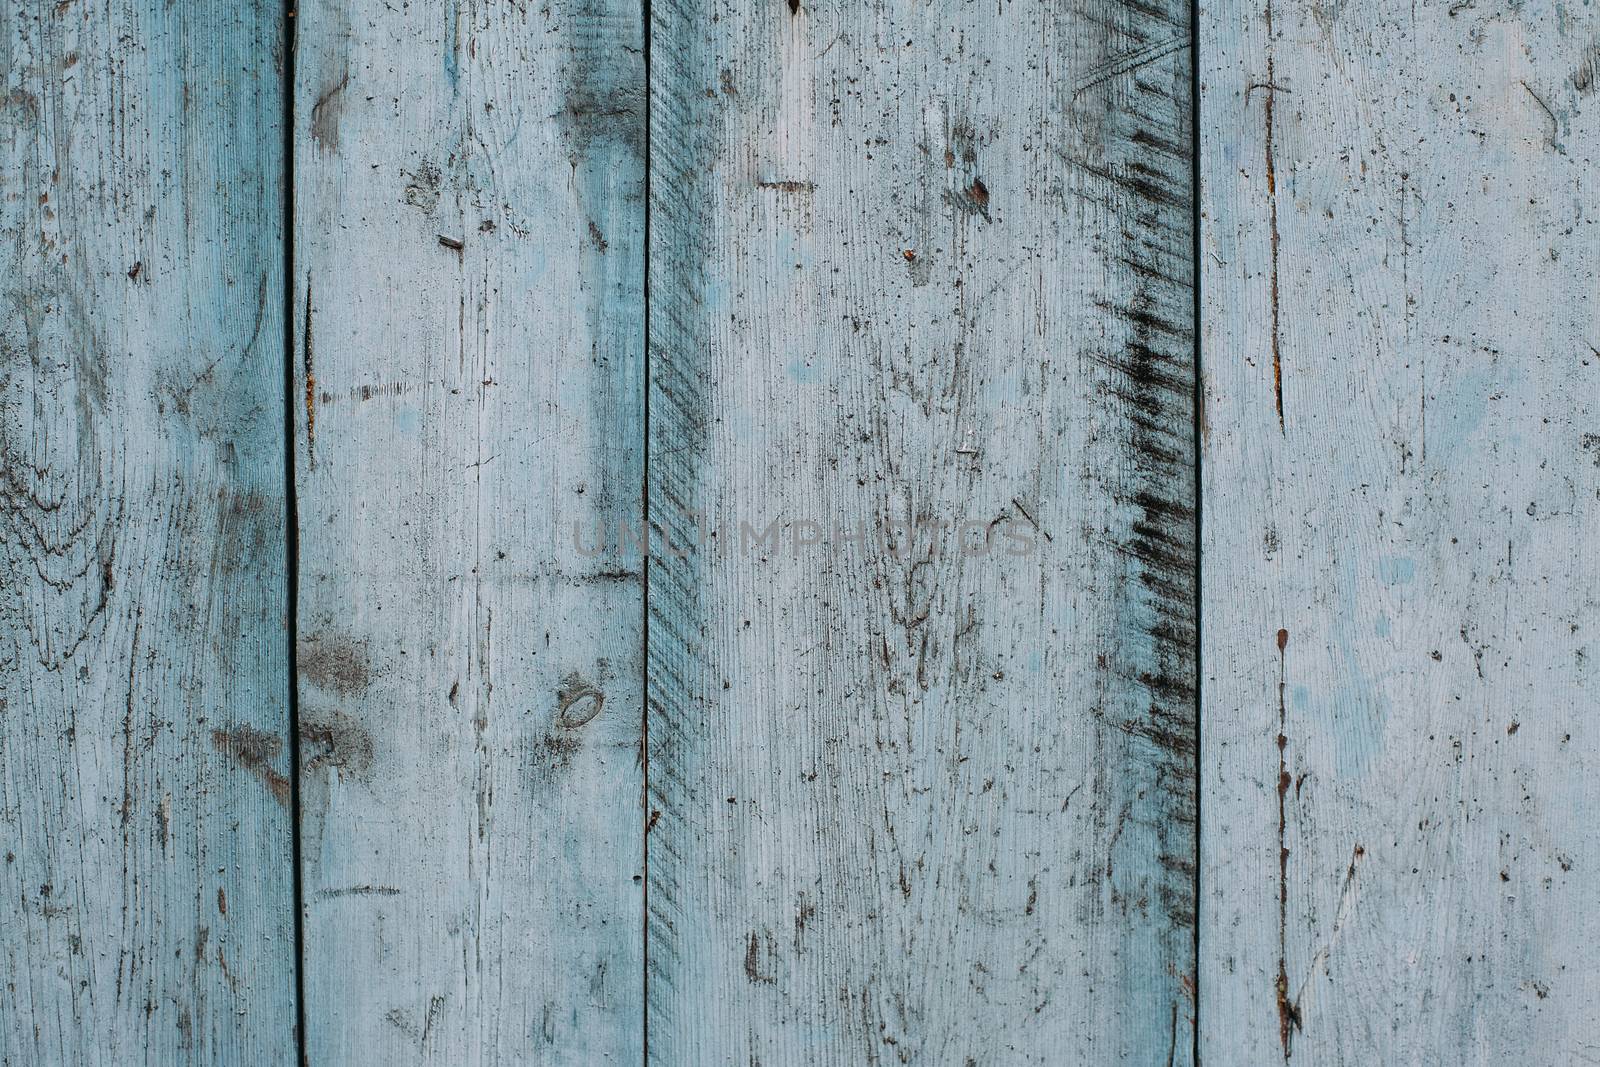 Horizontal background with vertical stripes of teal color by Opikanets